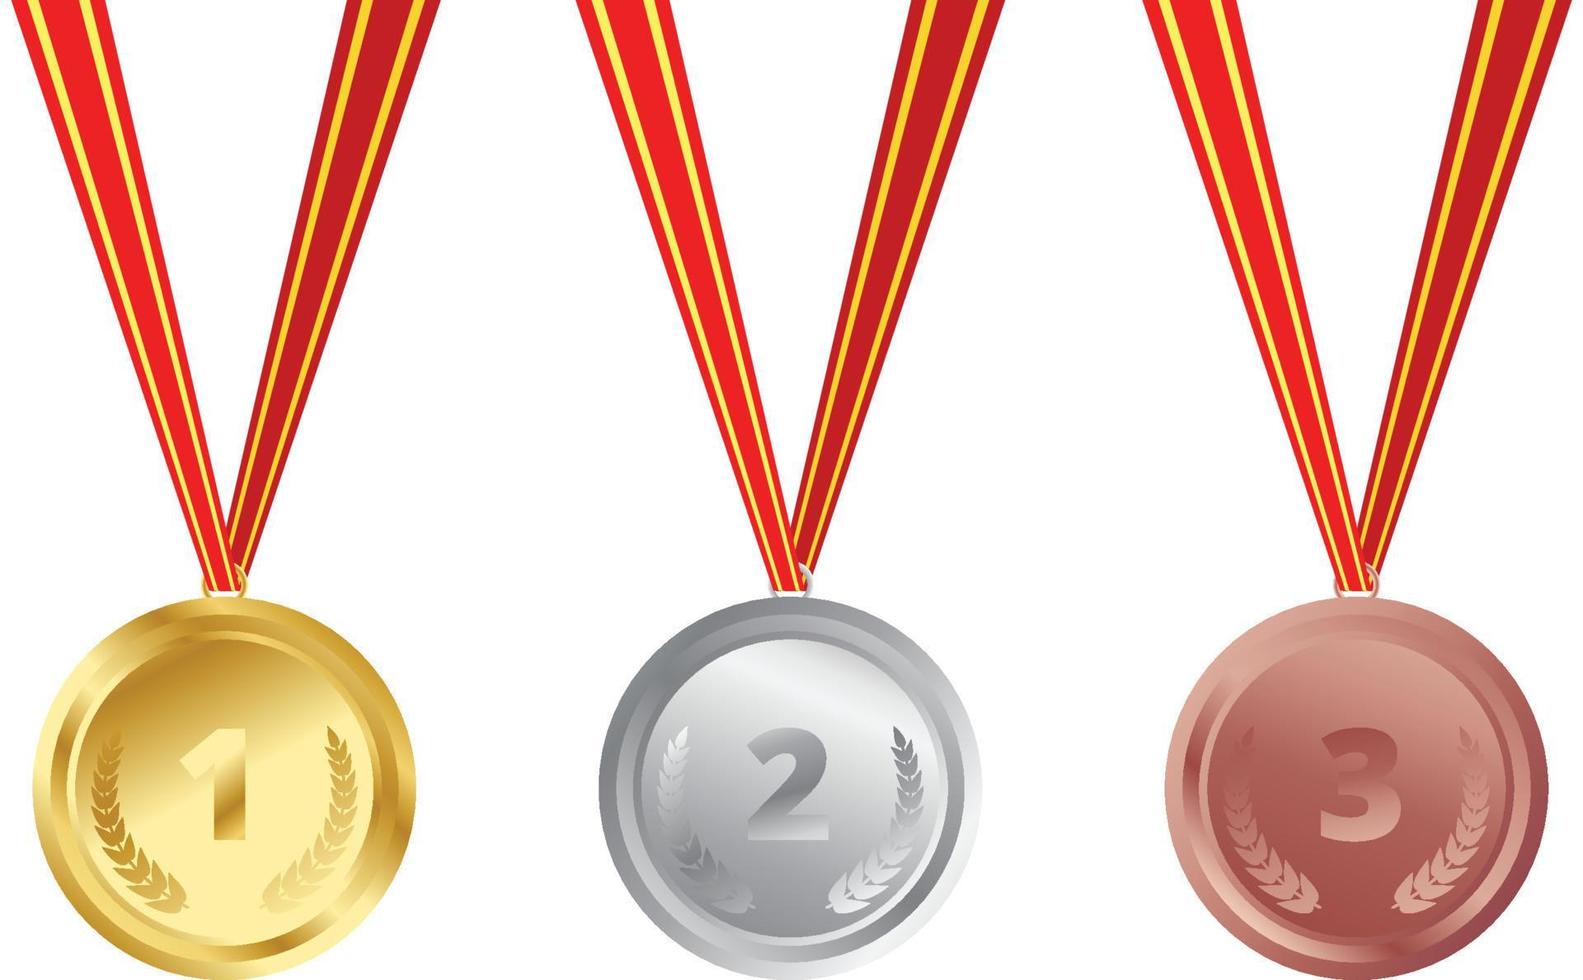 Medals set illustration, Gold silver and bronze medals on ribbons vector